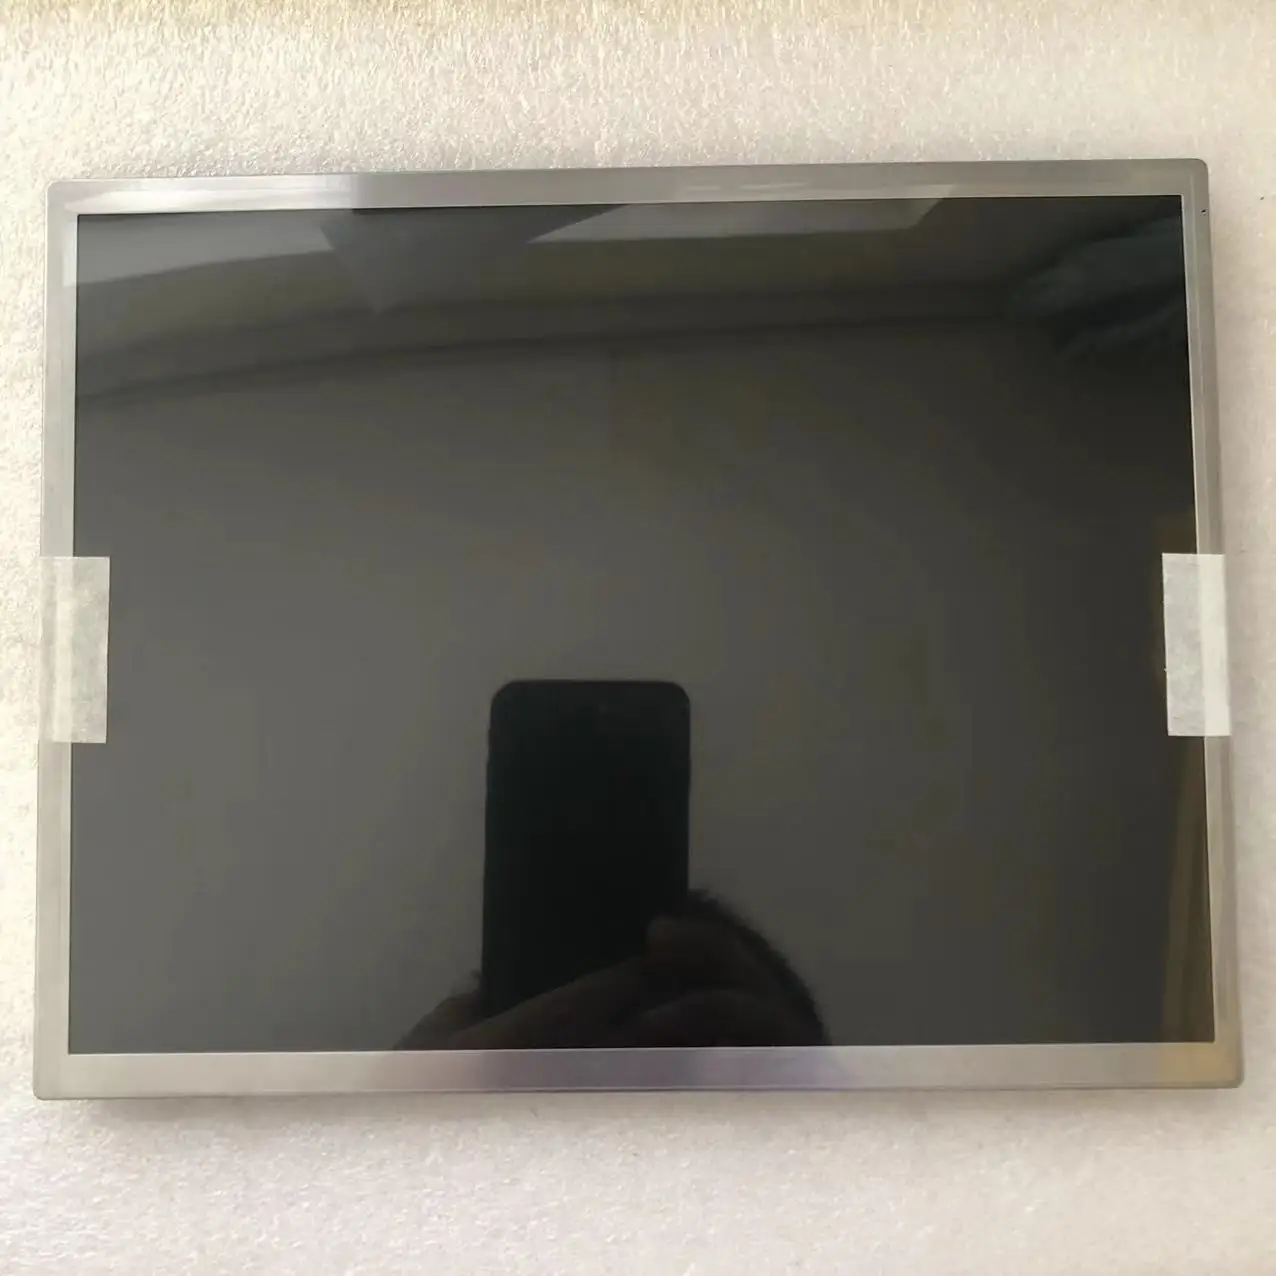 For 8.4-inch NL6448AC33-A1D LCD Screen Display Panel Fully Tested Before Shipment for 12 1 inch ltd121c31l 800 600 ccfl tft repair lcd screen display panel fully tested before shipment